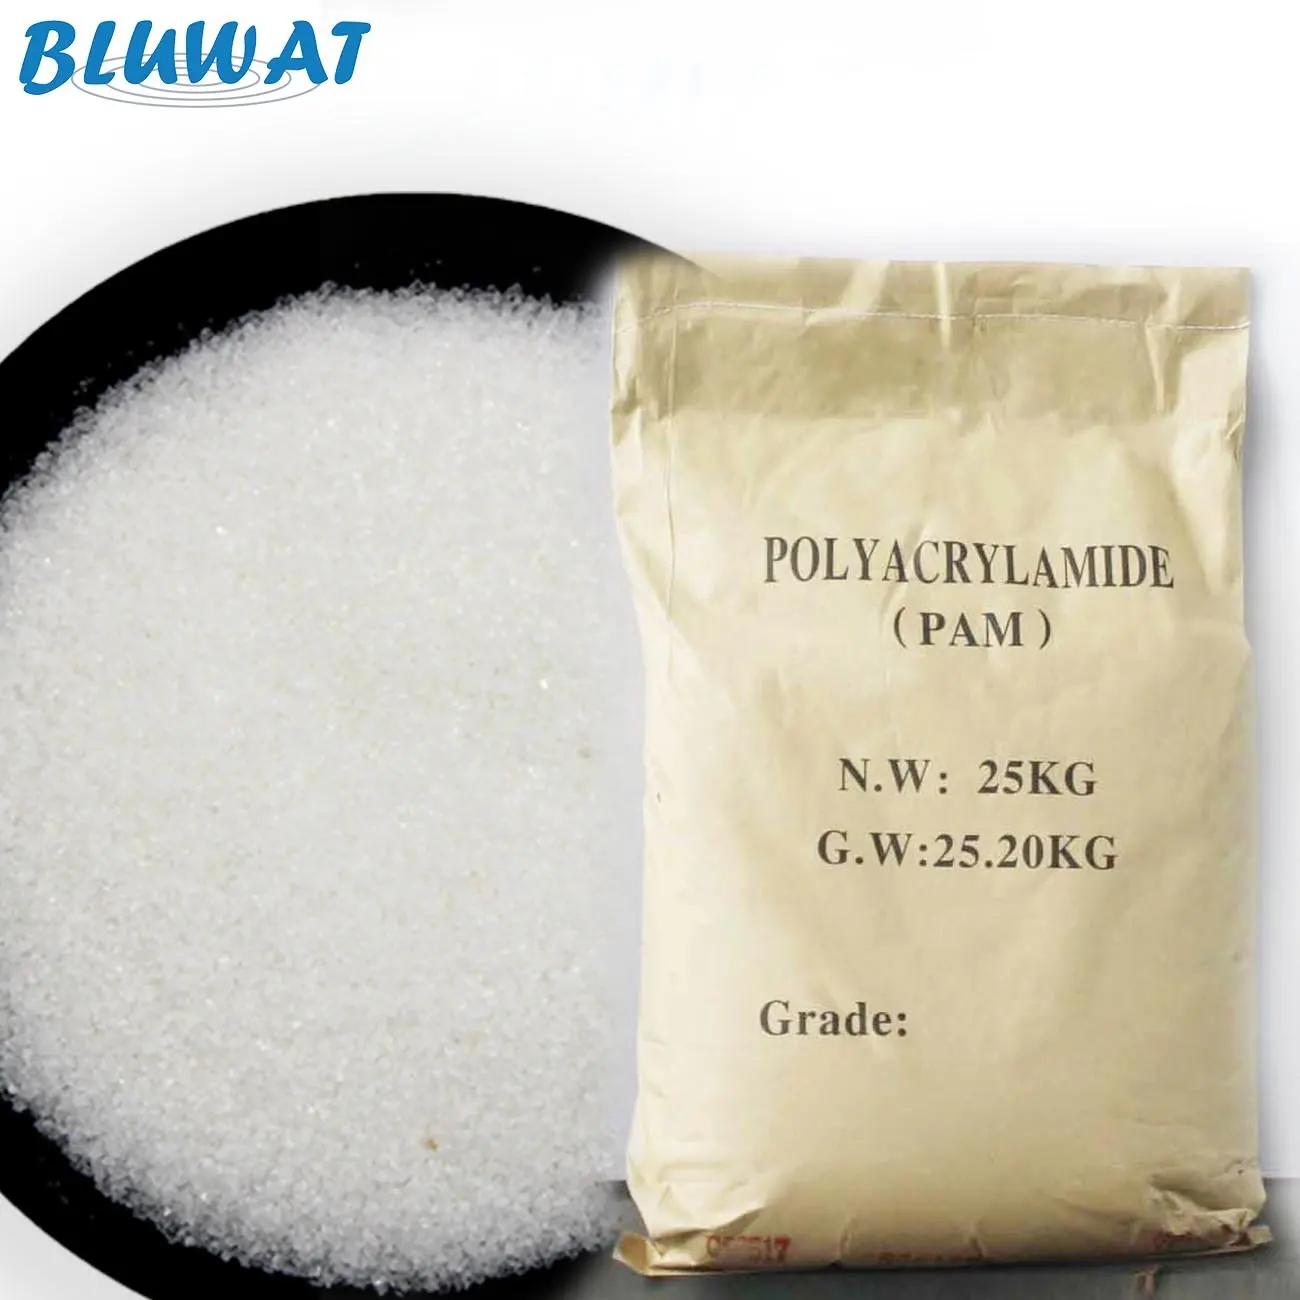 Polyacrylamide Flocculation Blufloc AA5516 High Molecular Weight Anionic Polyacrylamide PAM Flocculant For Mining